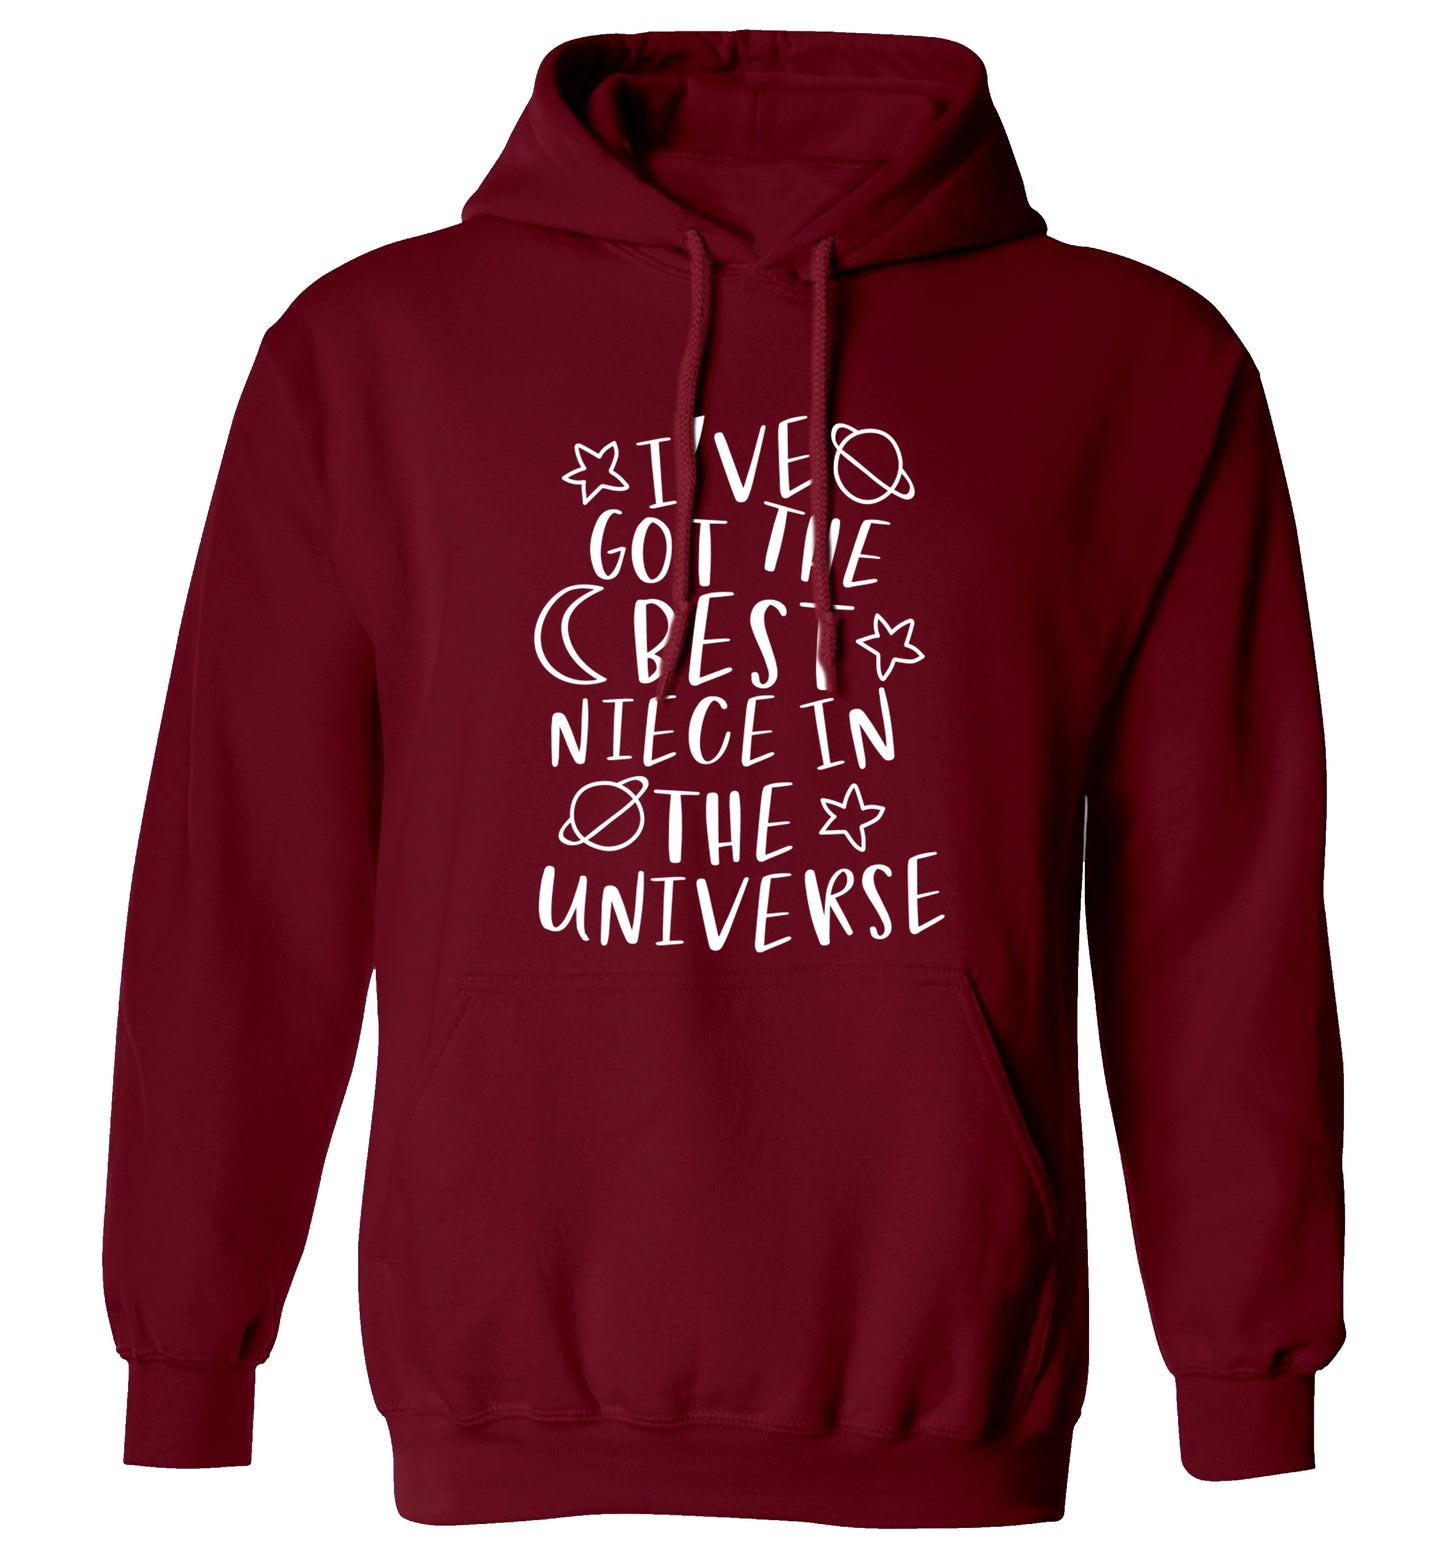 I've got the best niece in the universe adults unisex maroon hoodie 2XL